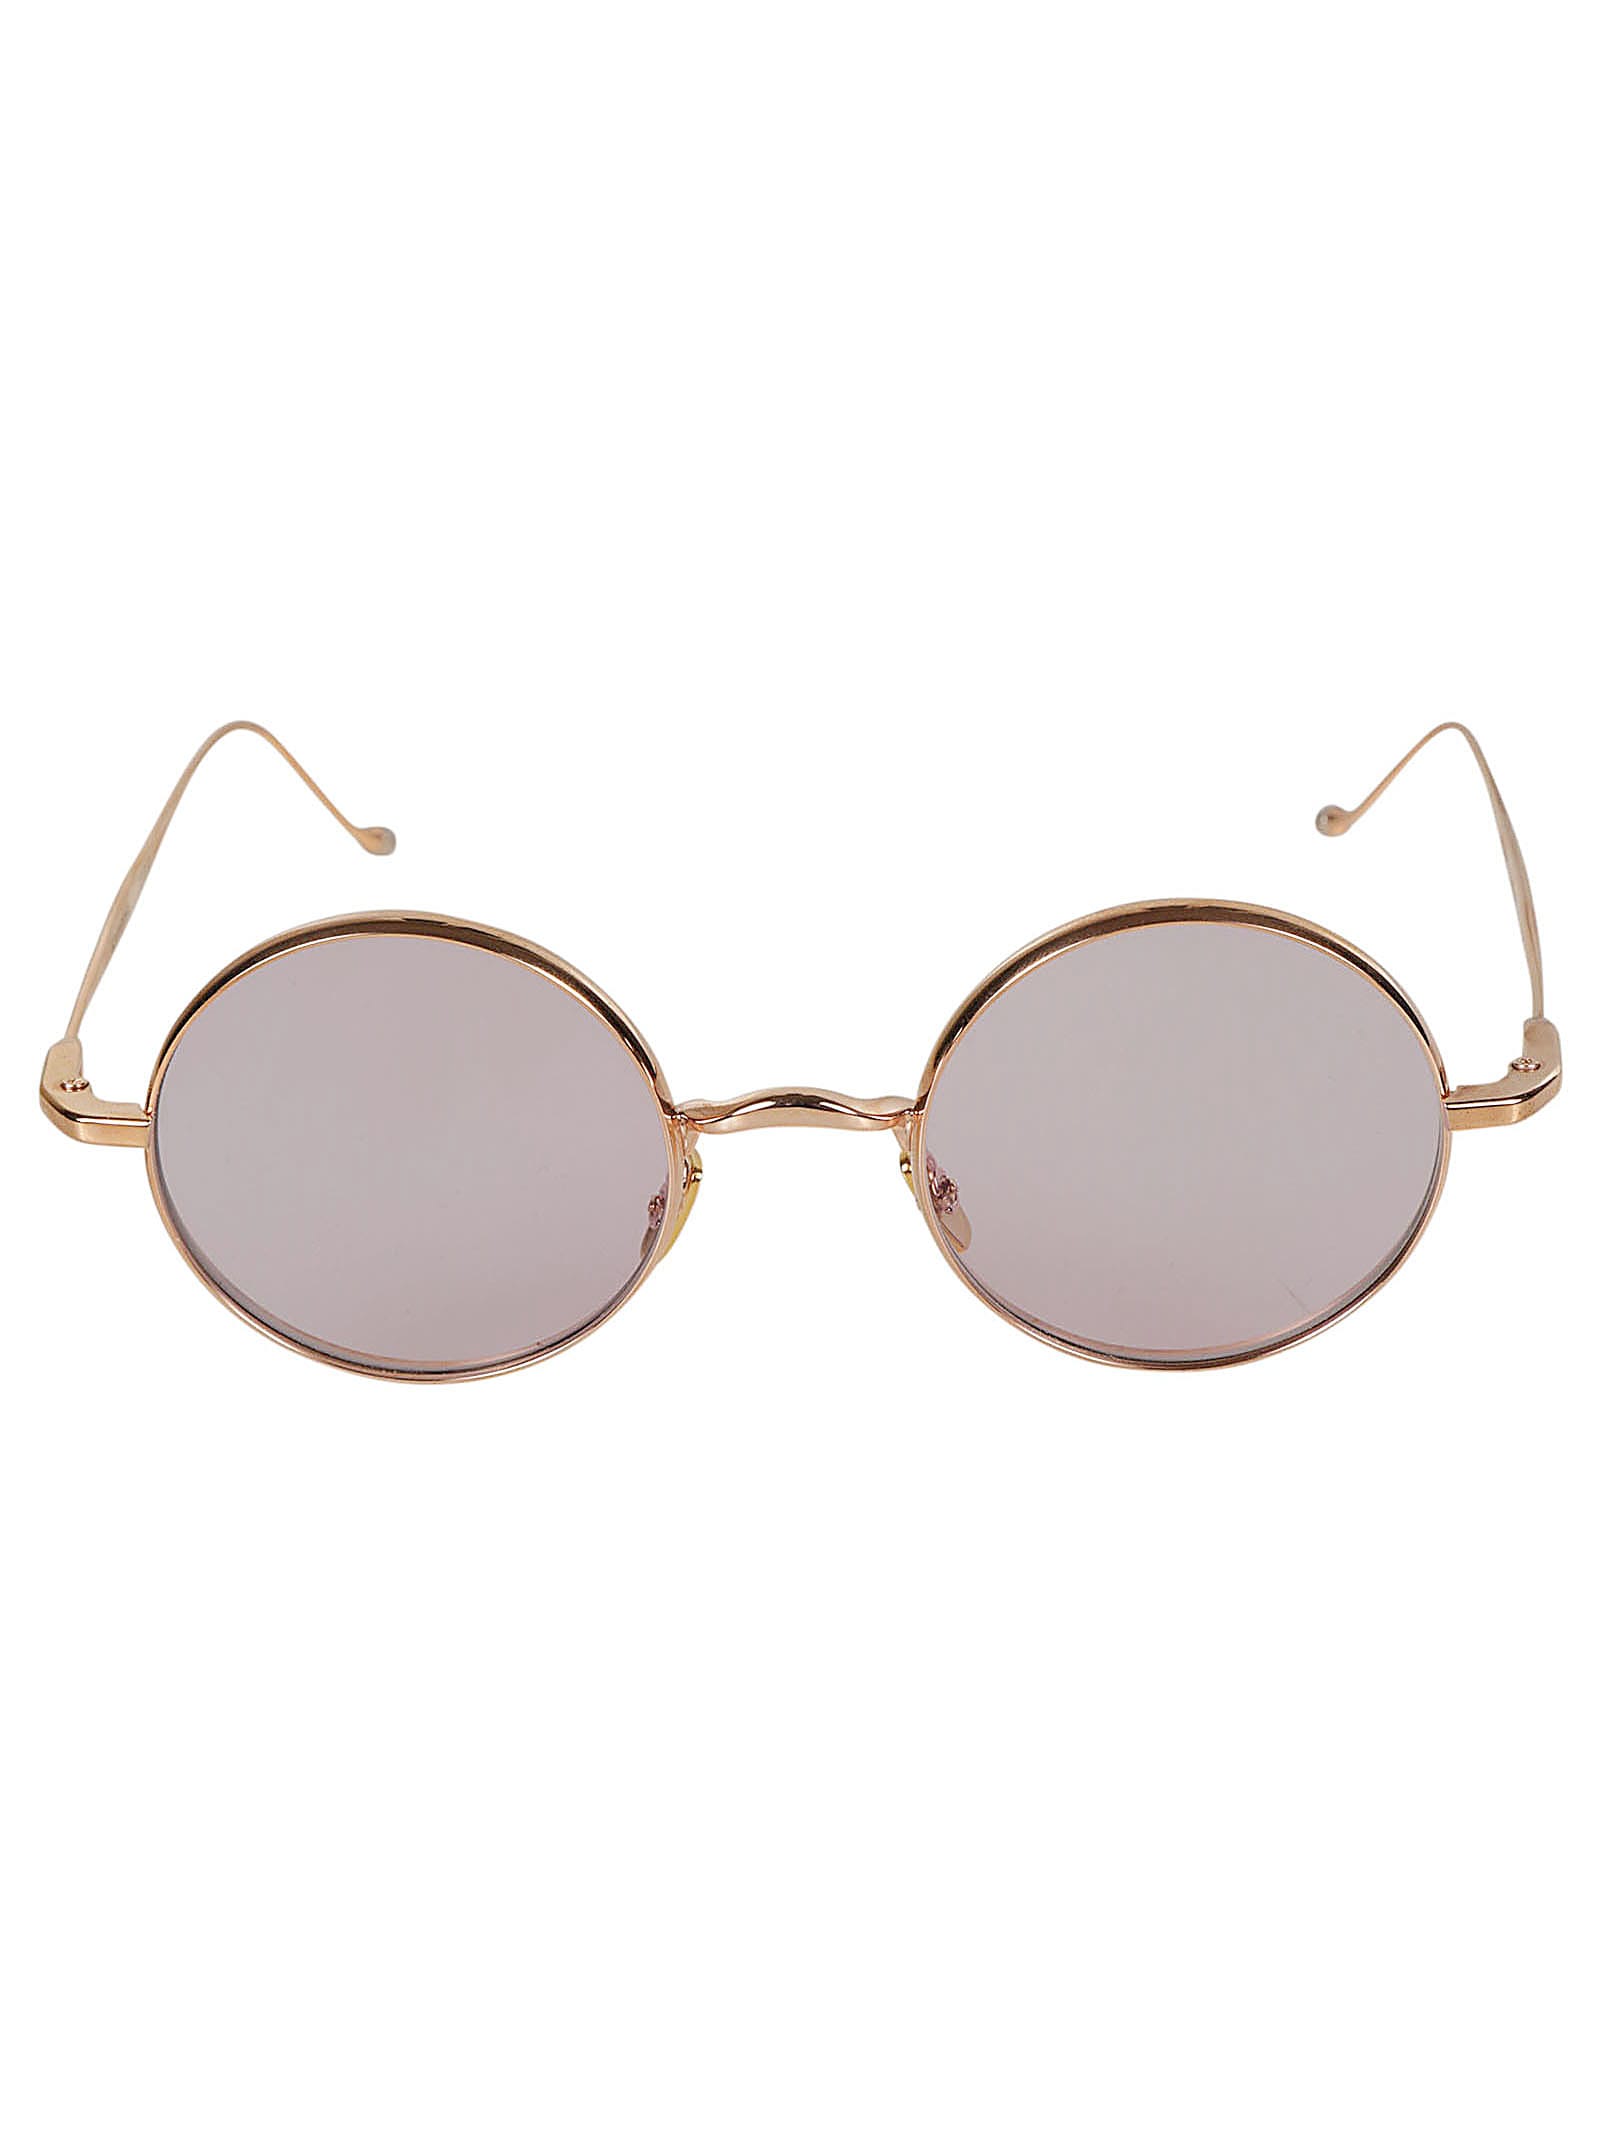 Jacques Marie Mage Diana Sunglasses Sunglasses In Rose Gold